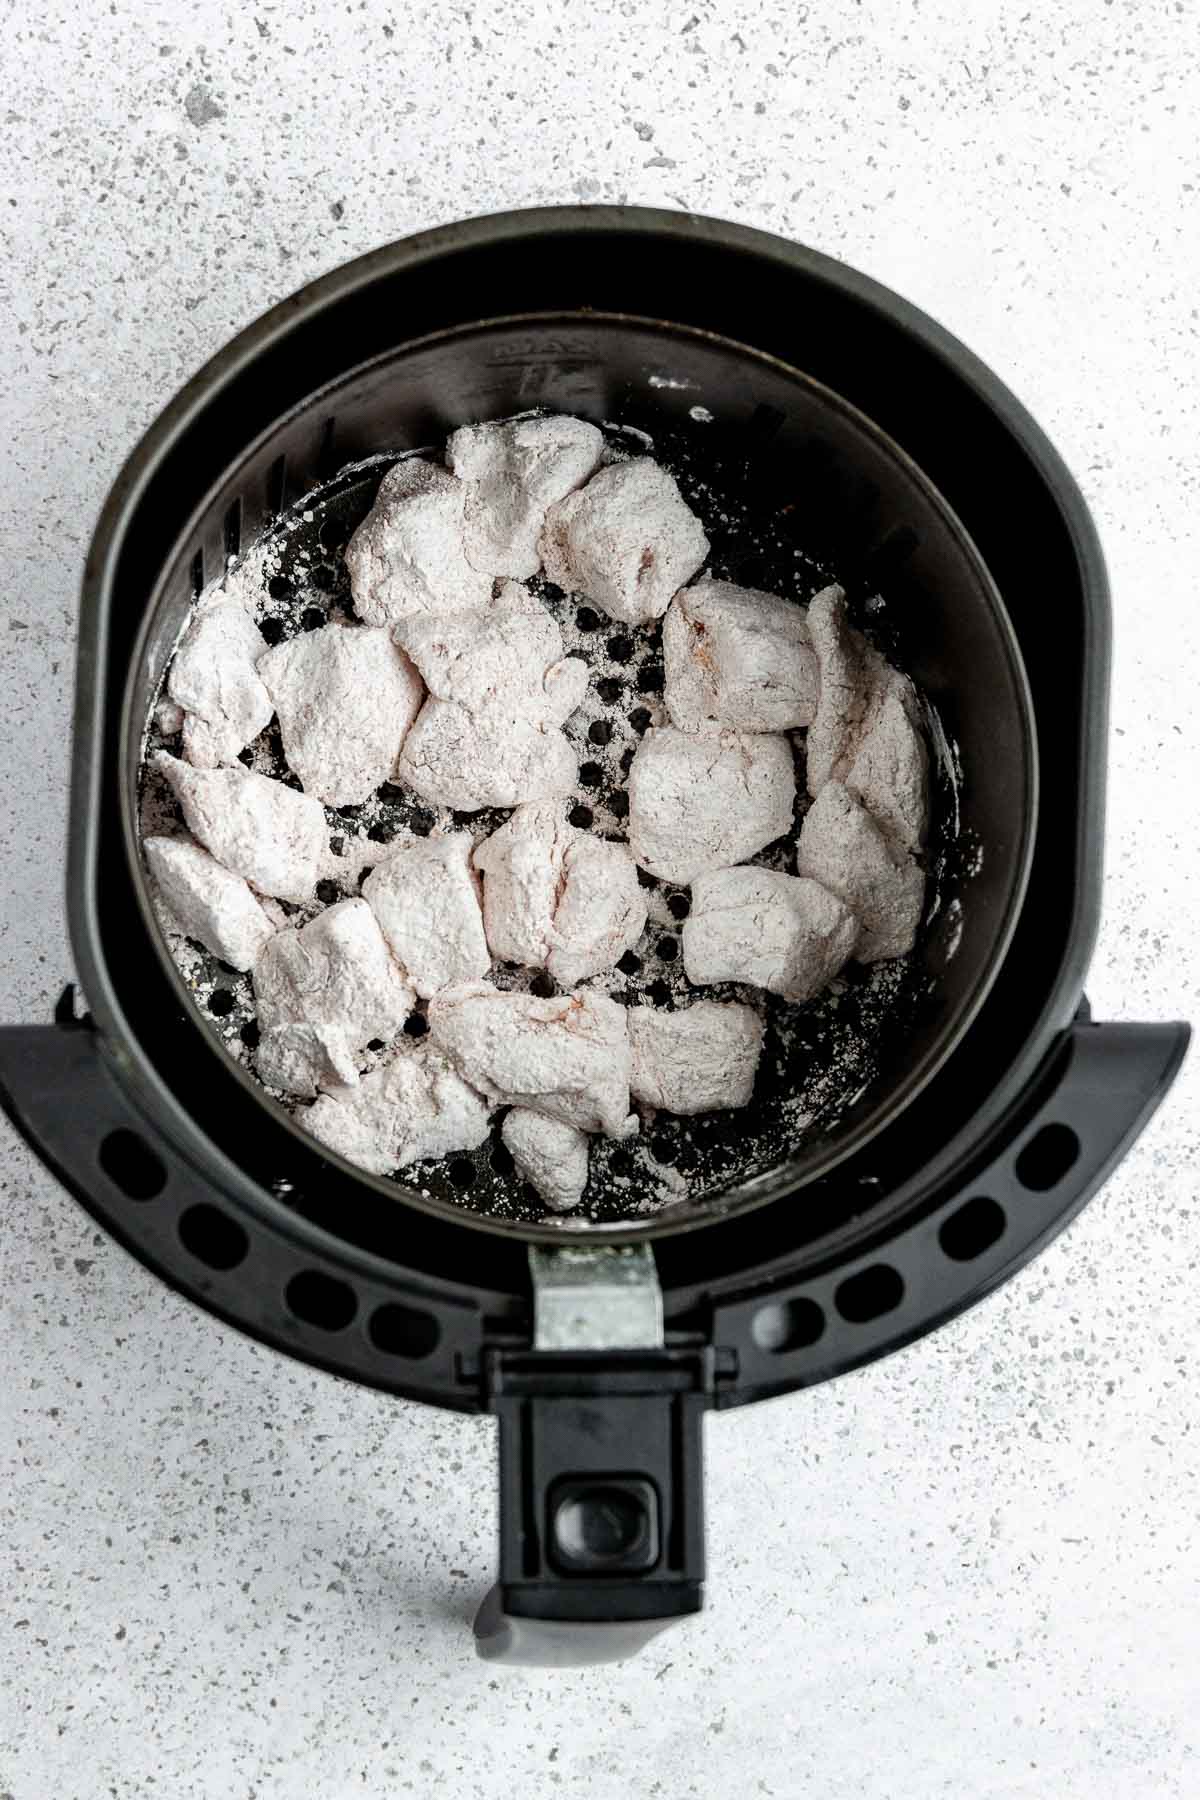 Coated chicken pieces in an air fryer.